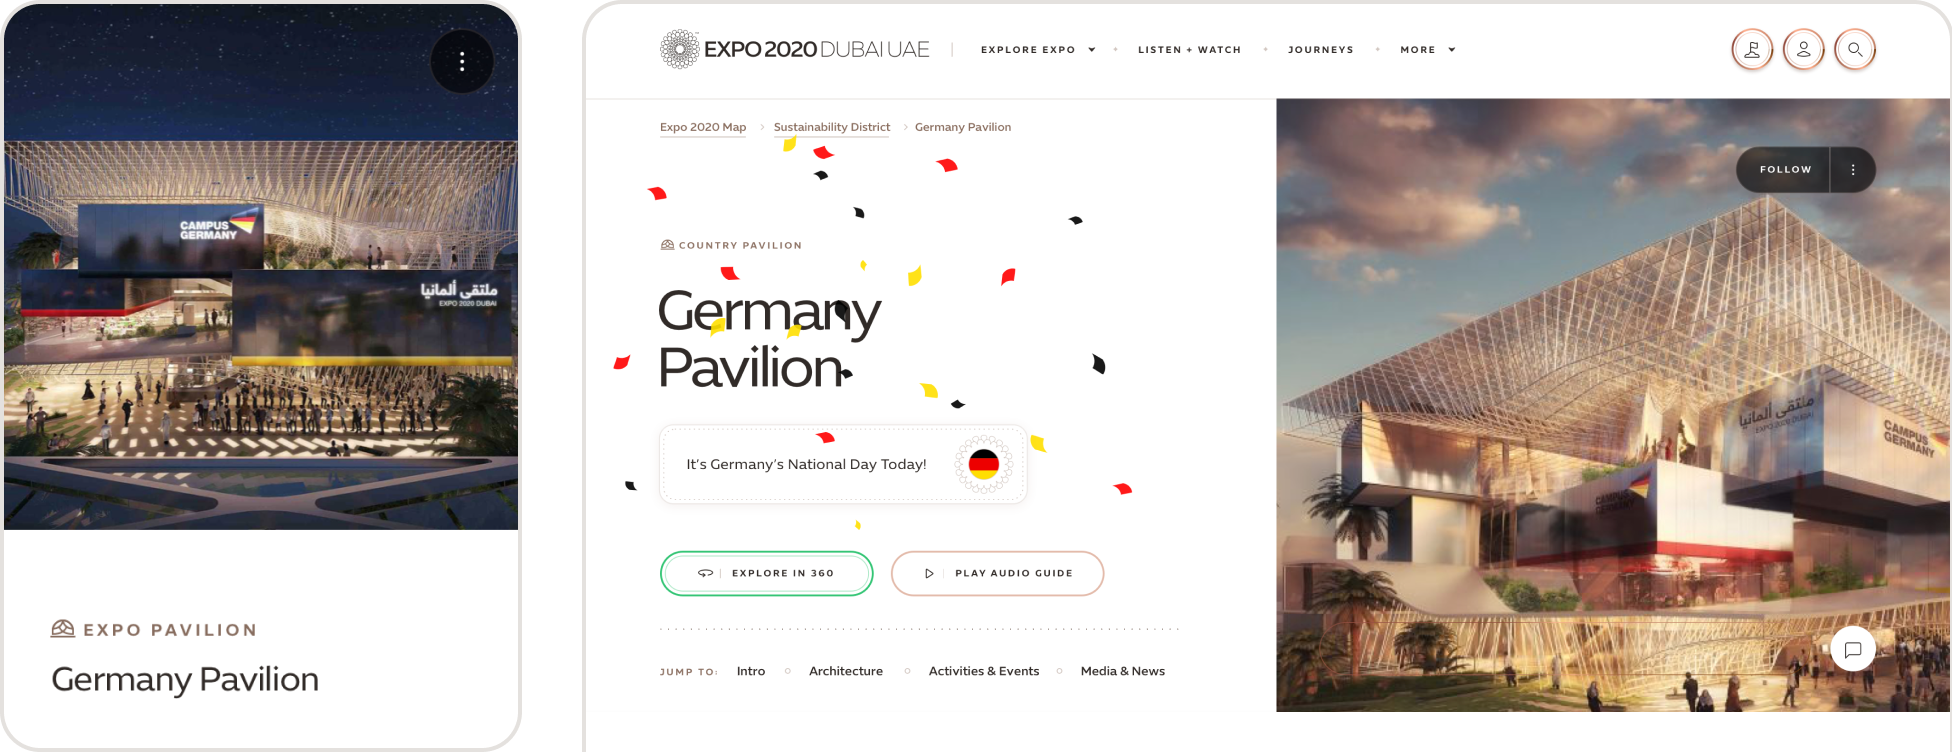 Expo-CardHeaderPavilion@2x.png